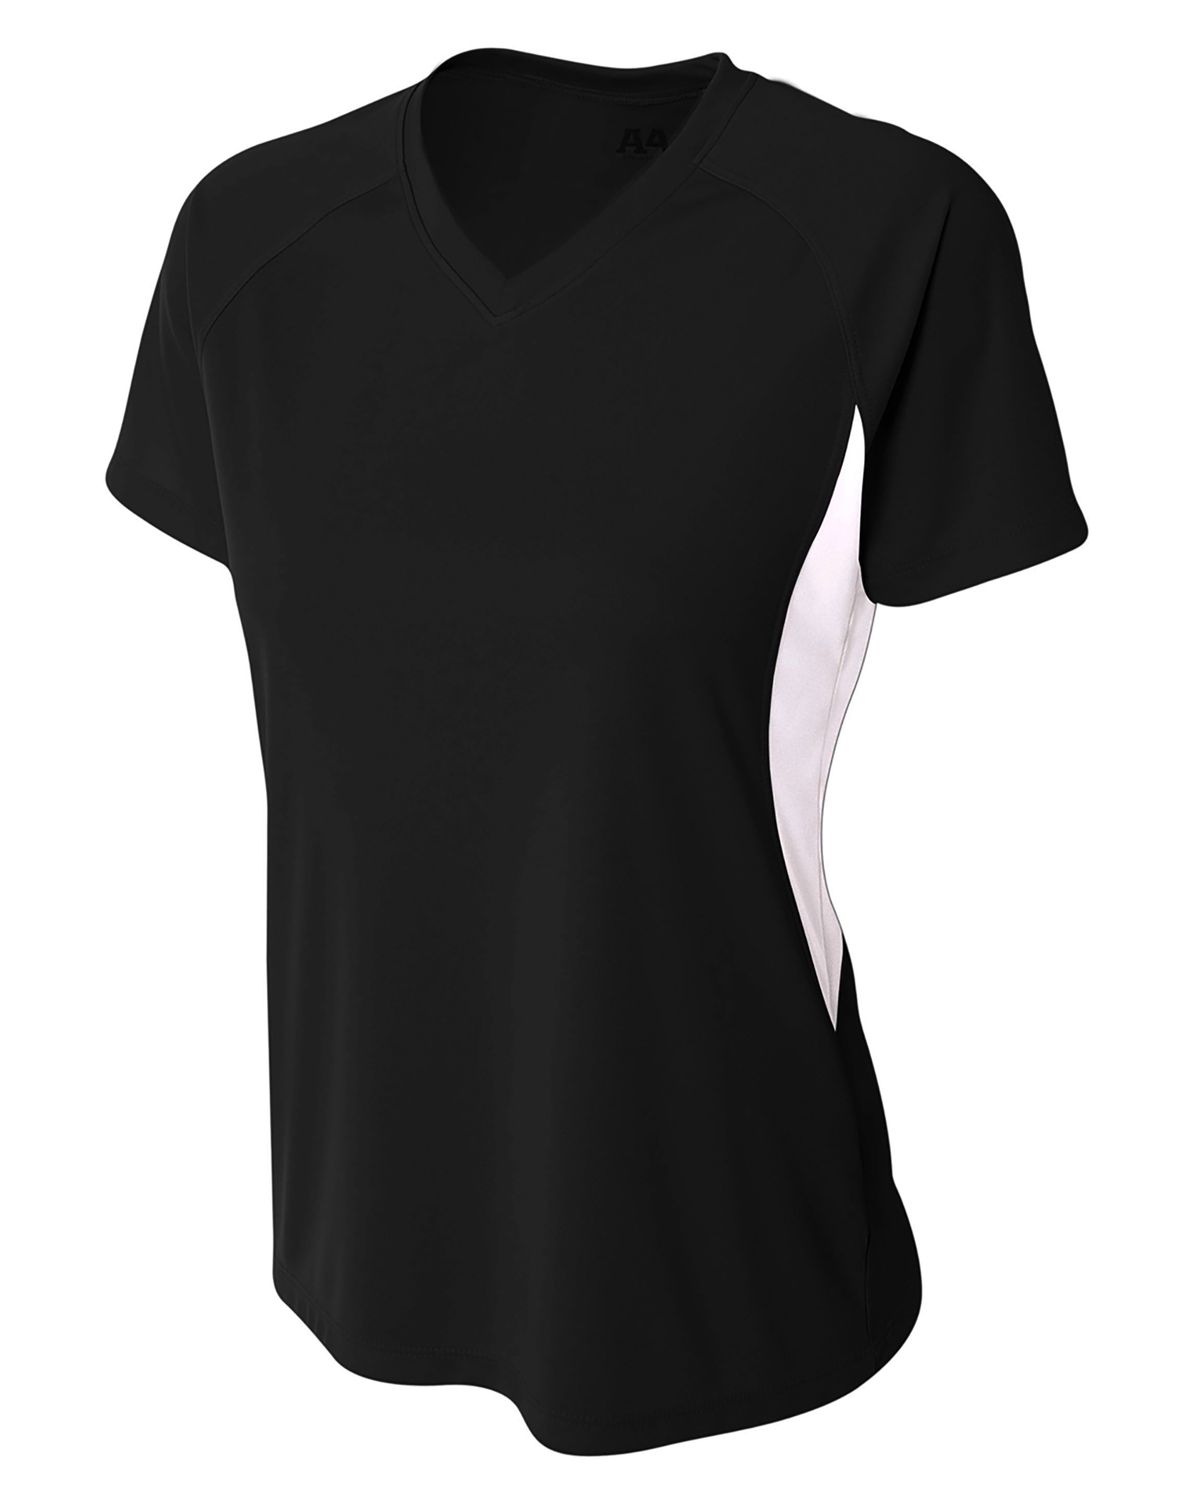 'A4 NW3223 Ladies Color Block Performance V-Neck T-Shirt'